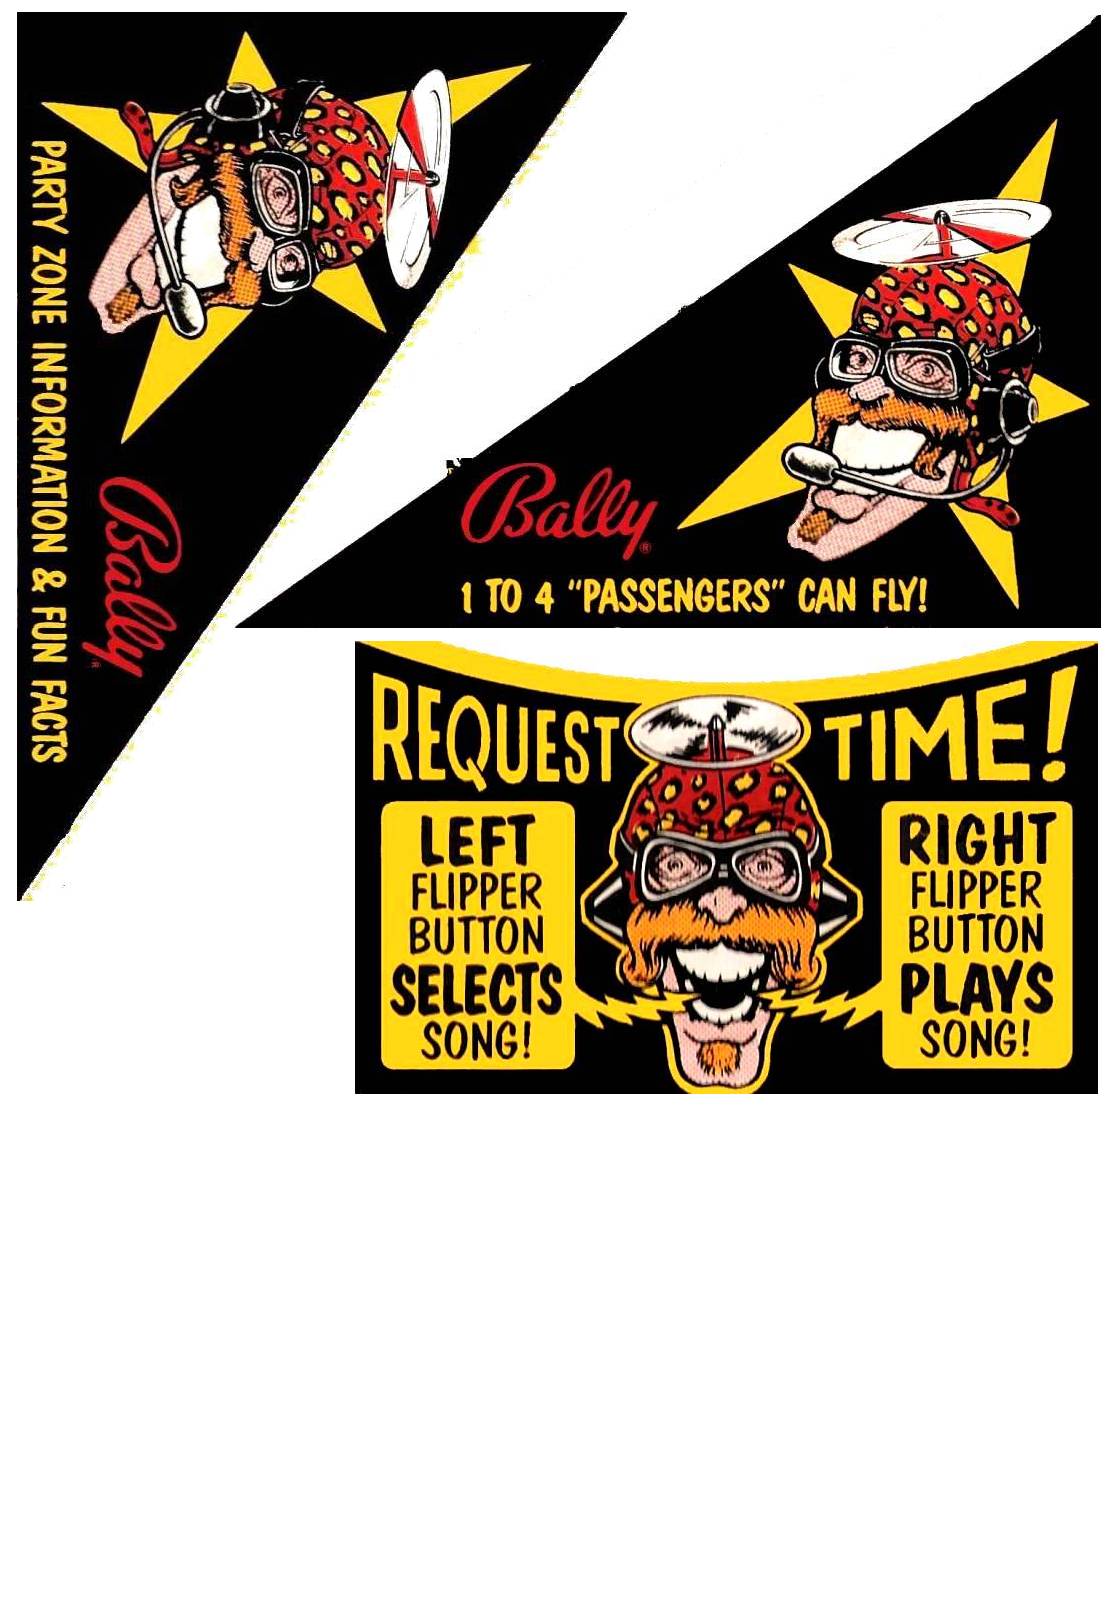 Bally_1991_Party_Zone_Playfield_Apron_Graphics